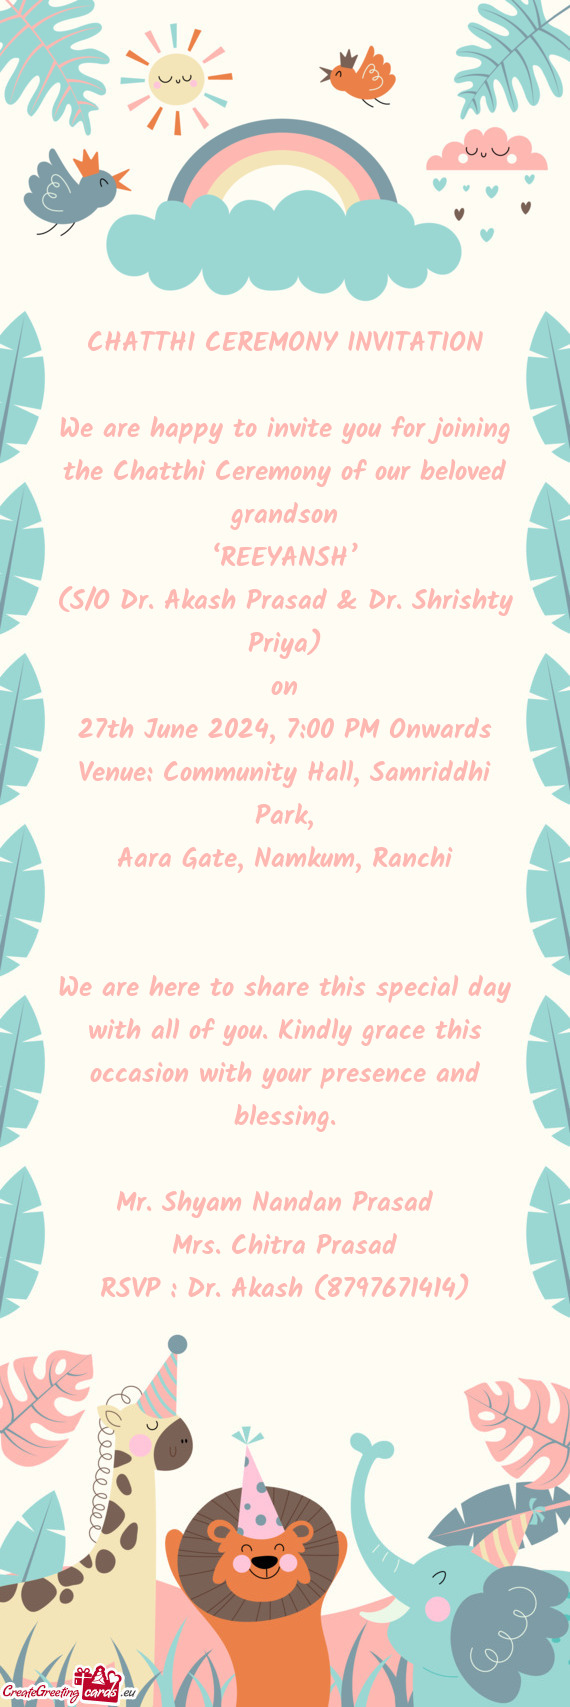 We are happy to invite you for joining the Chatthi Ceremony of our beloved grandson